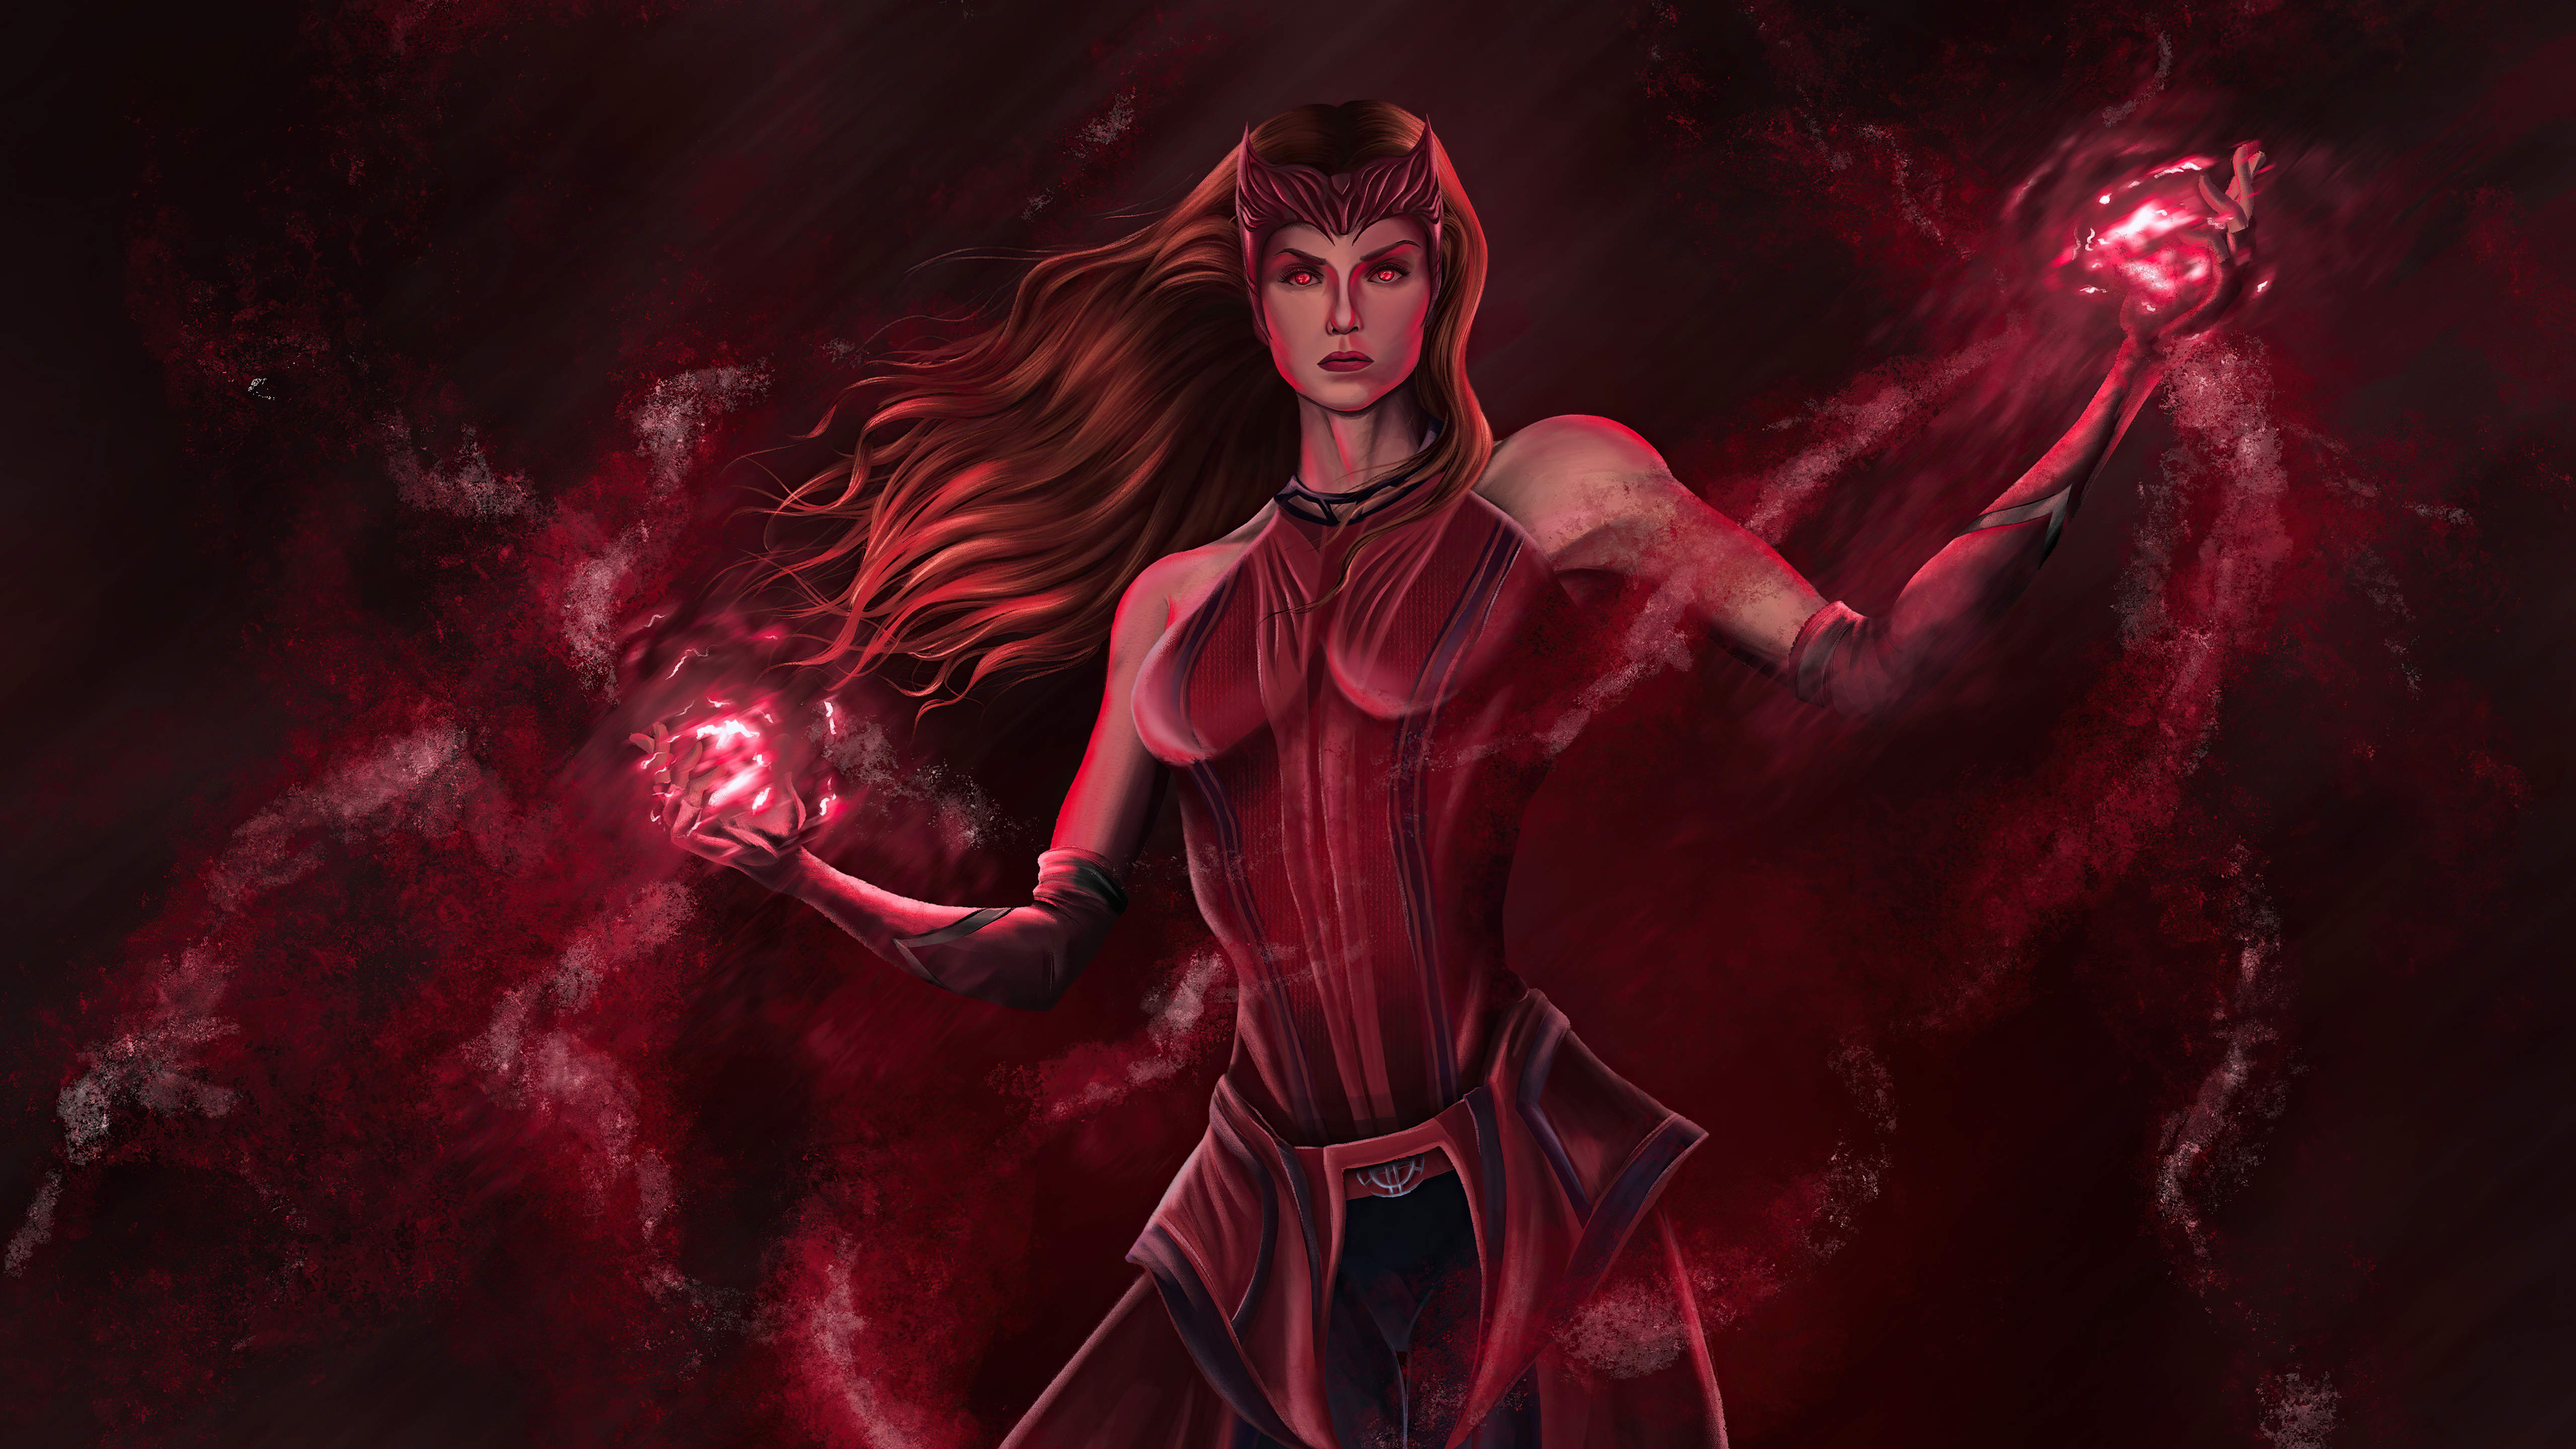 Wallpaper 4k The Scarlet Witch Wanda Maximoff From Marvel